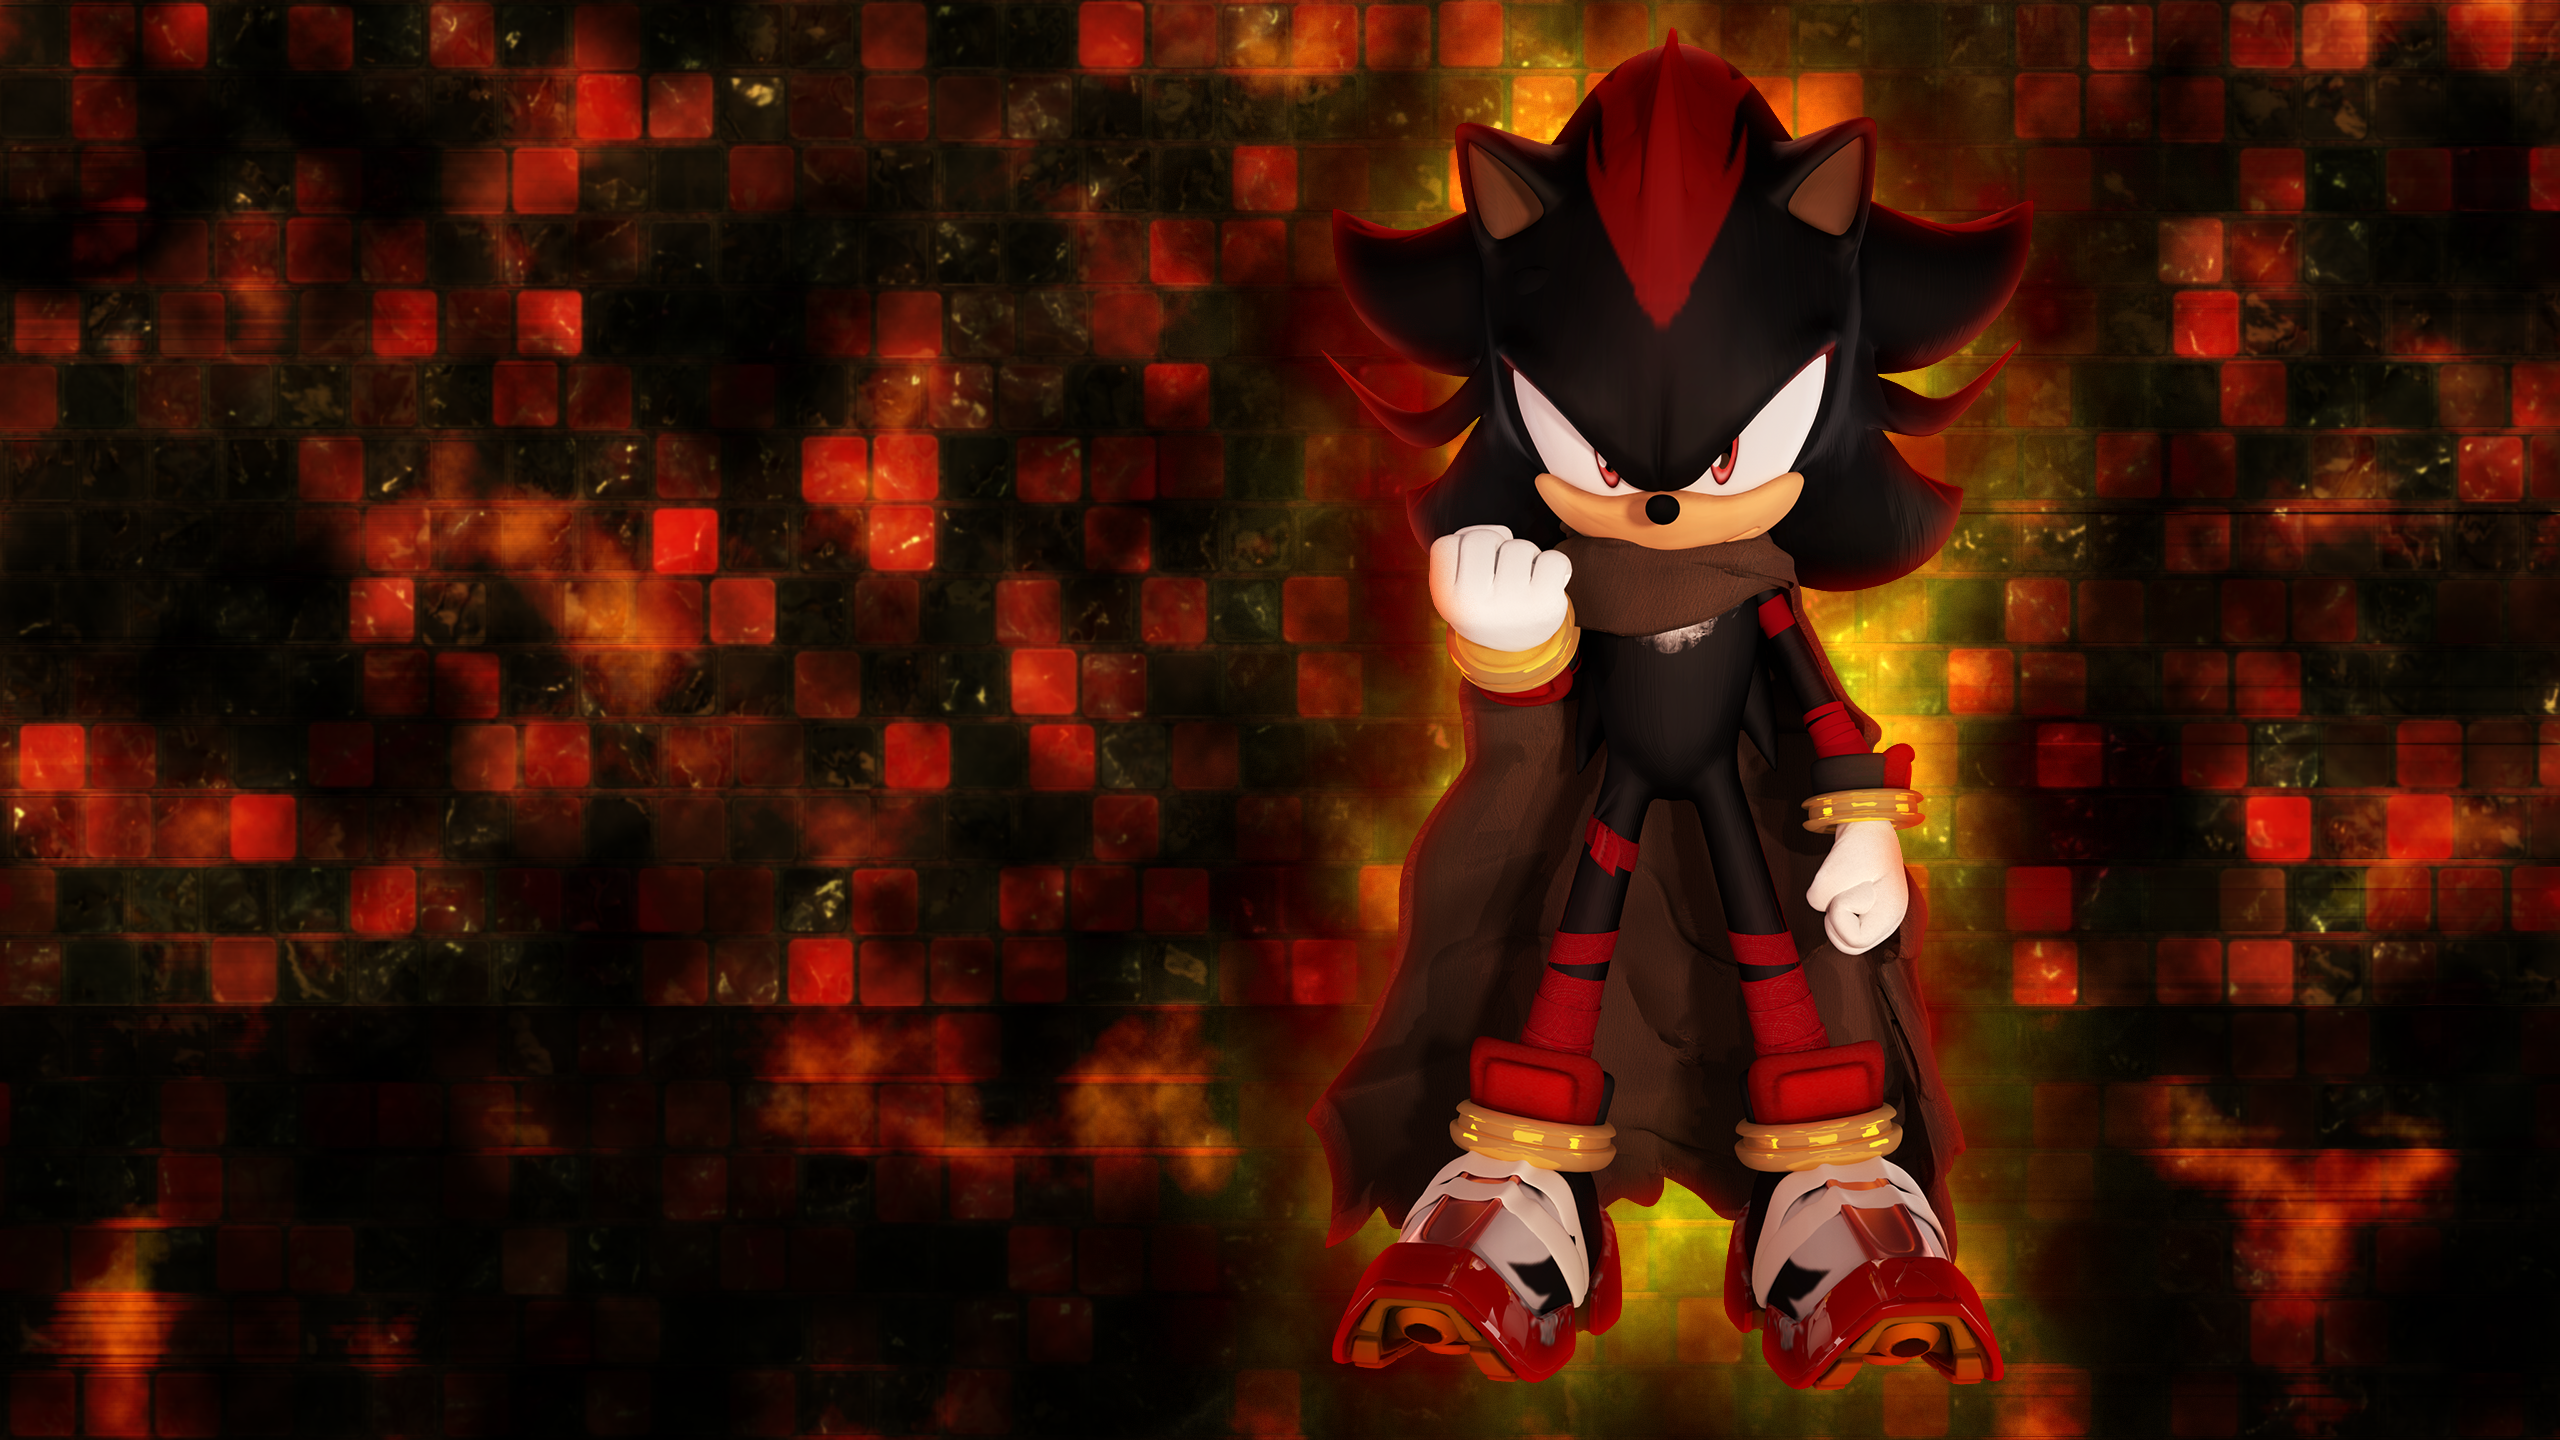 Shadow from Sonic Boom by Light-Rock by Light-Rock